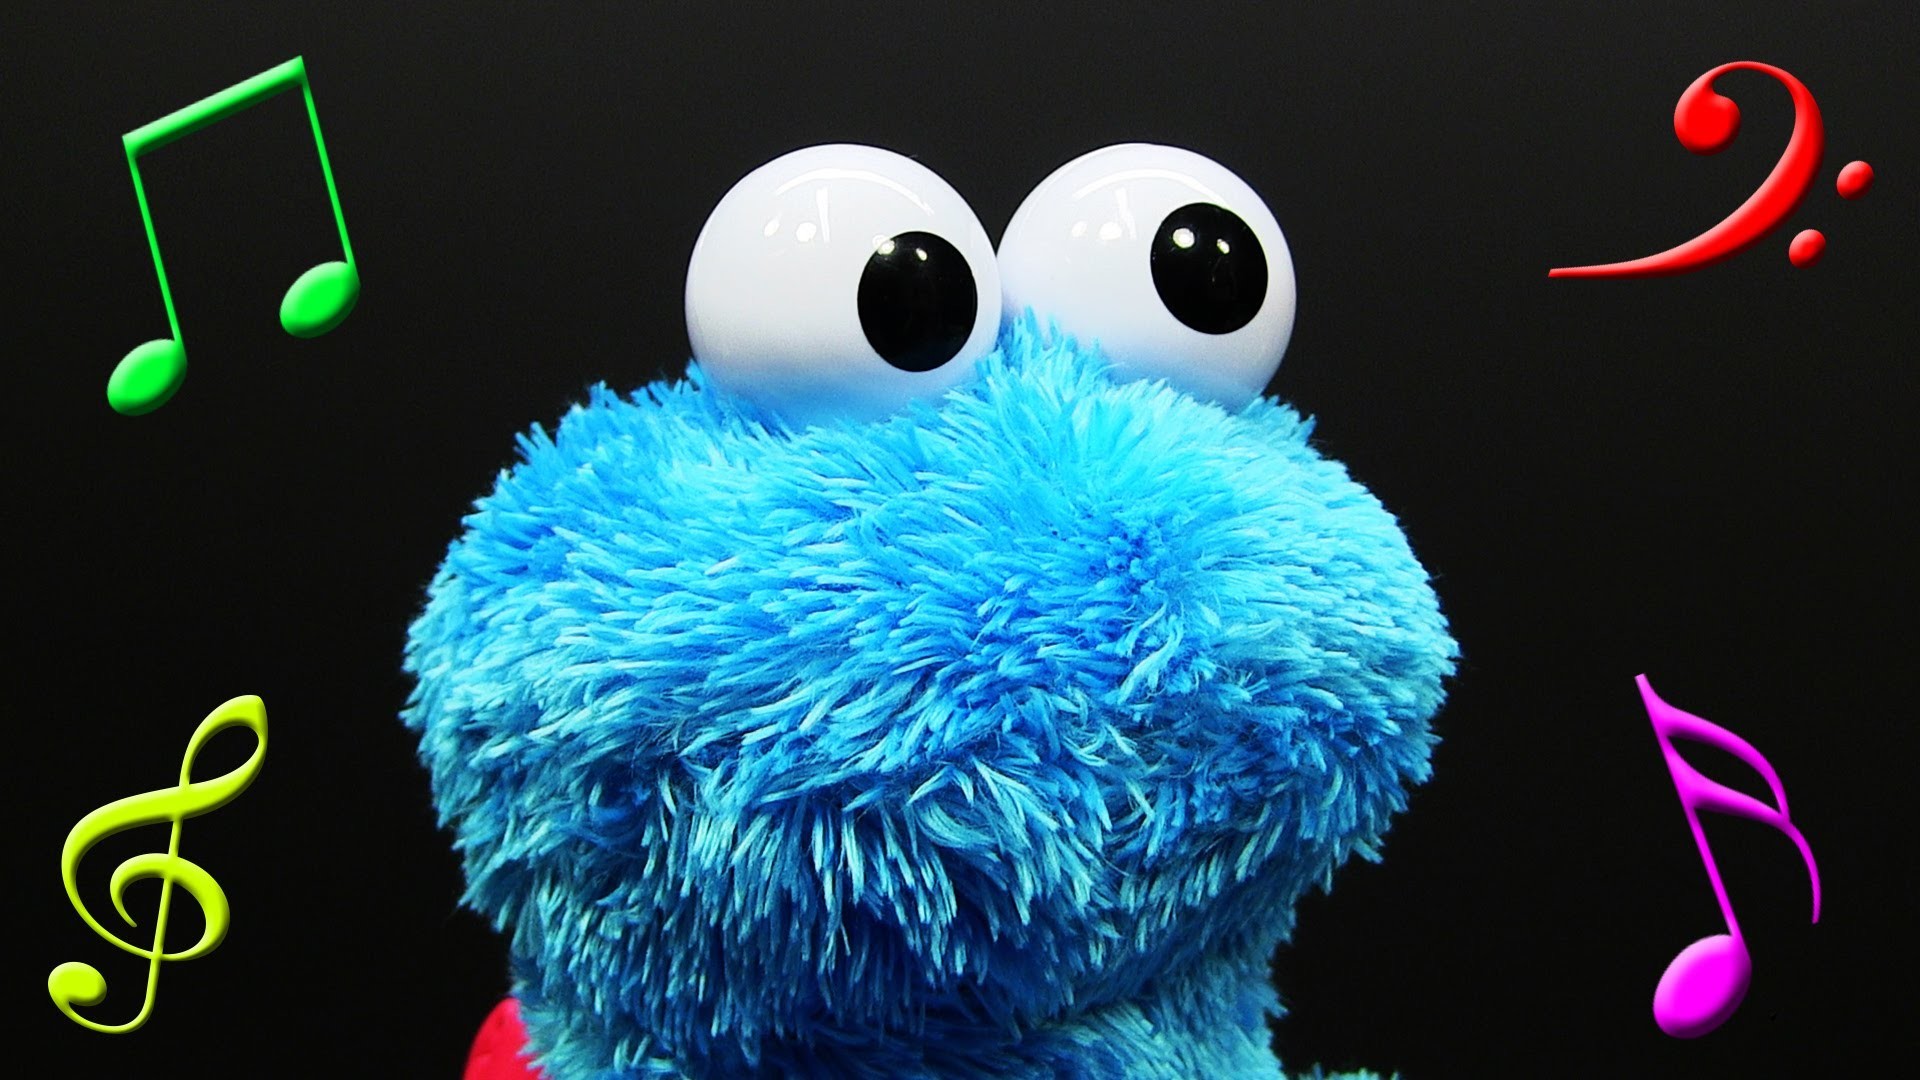 High Resolution Cookie Monster Music Wallpaper Hd 1080p Full Size